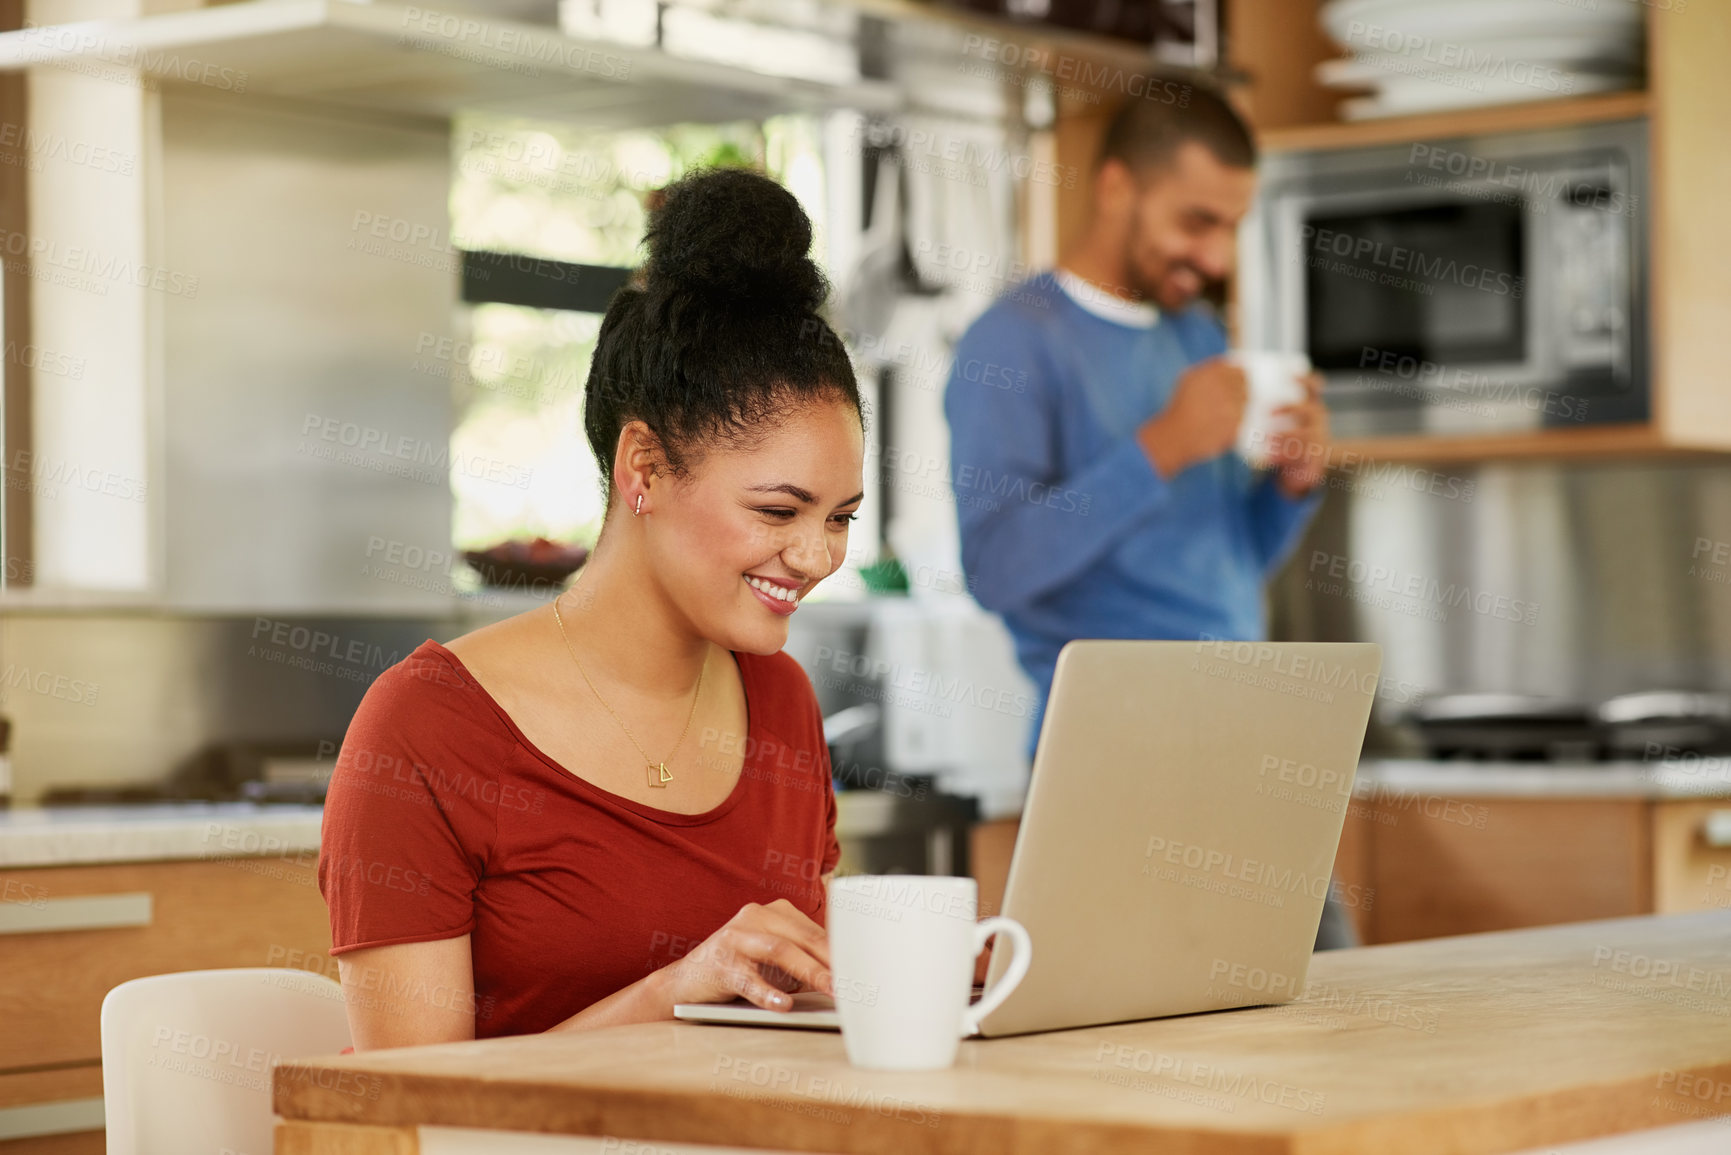 Buy stock photo Shot of a happy young woman using a laptop at home with her husband in the background